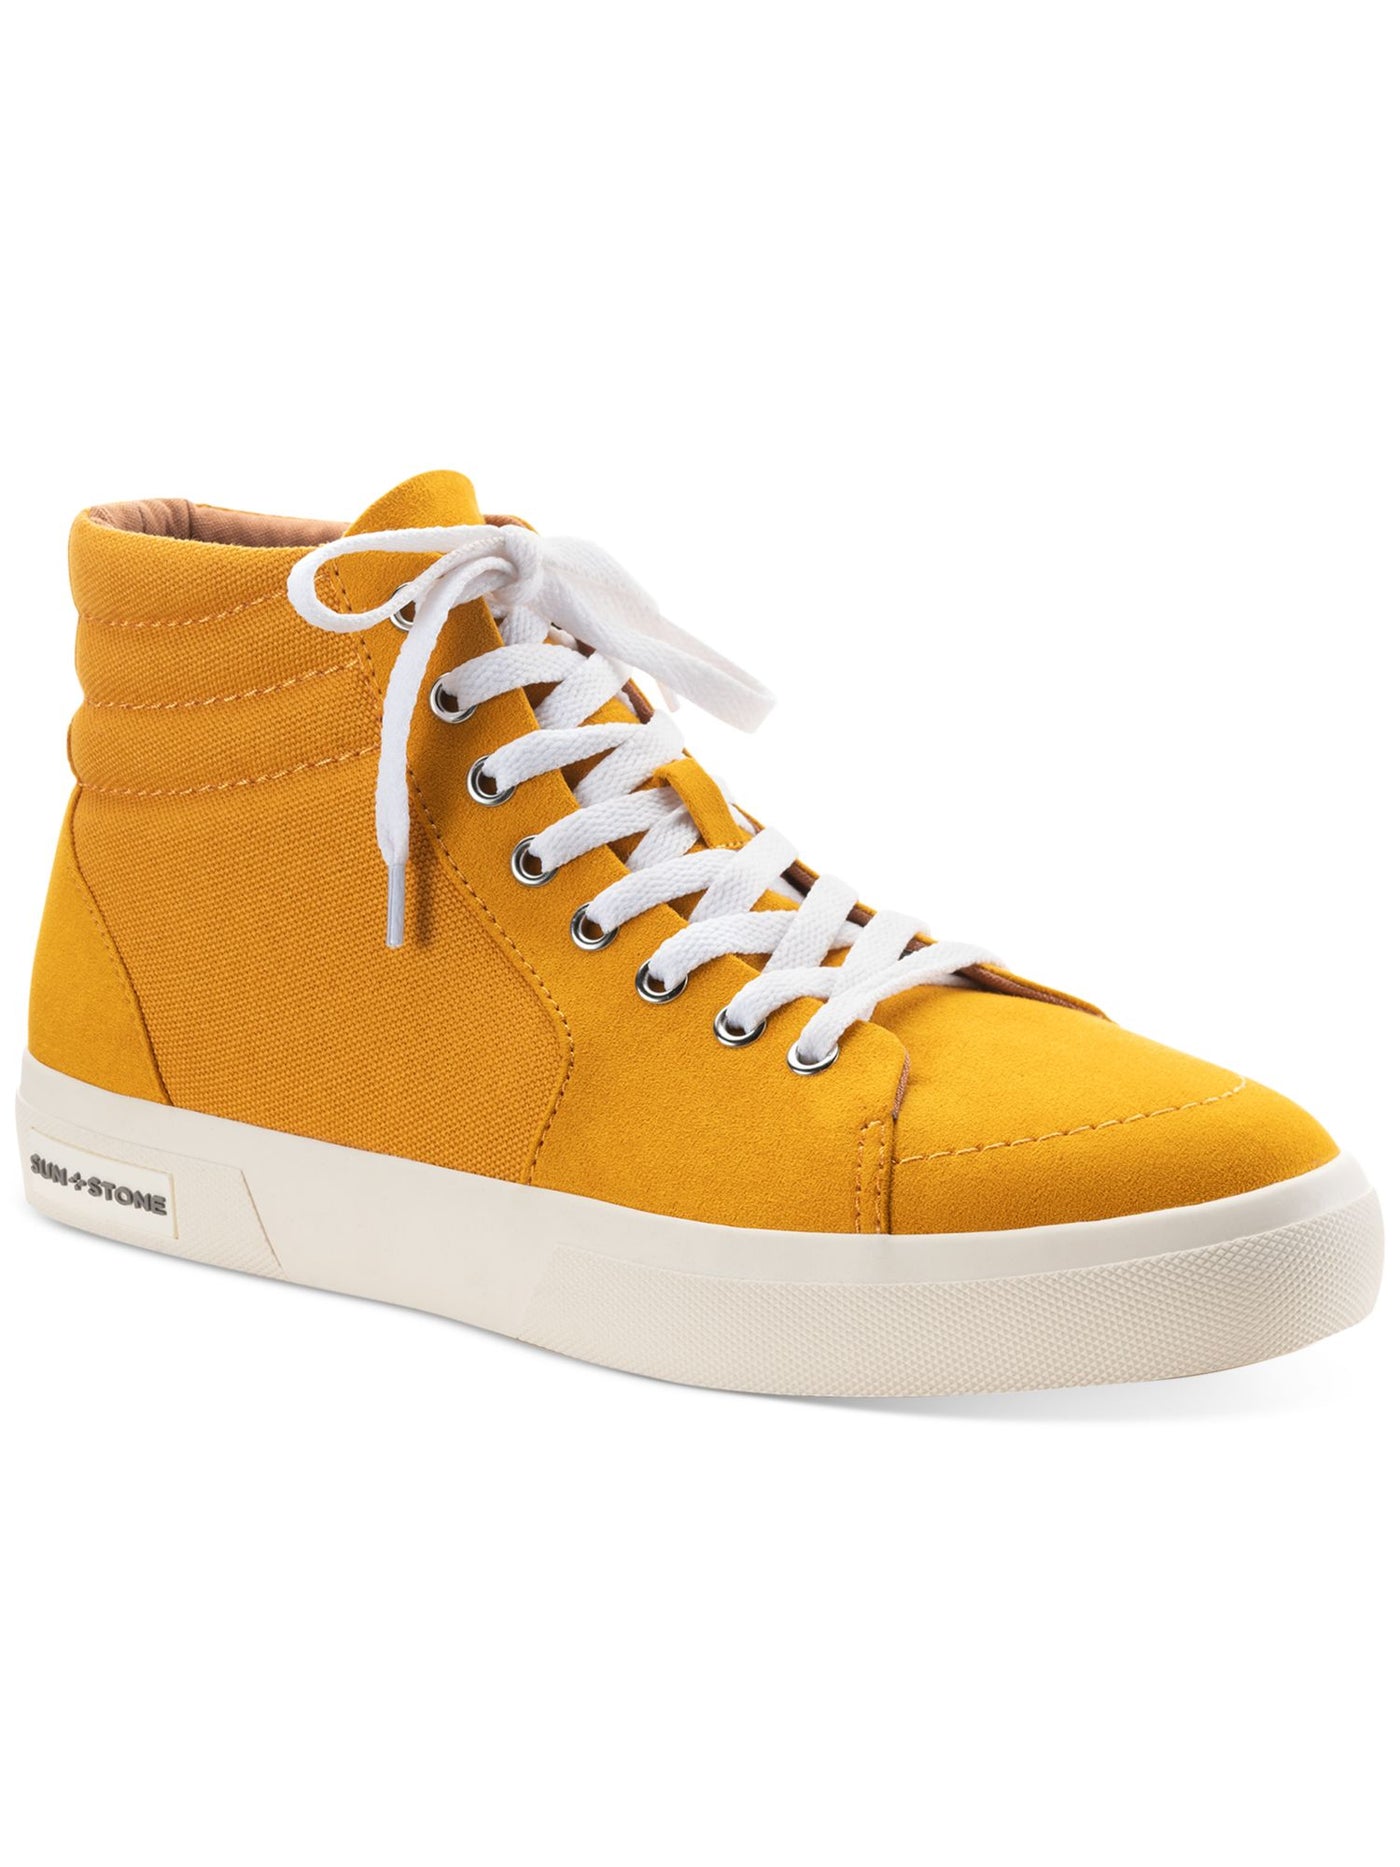 SUN STONE Mens Yellow Cushioned Jett Round Toe Platform Lace-Up Athletic Sneakers Shoes 8 M